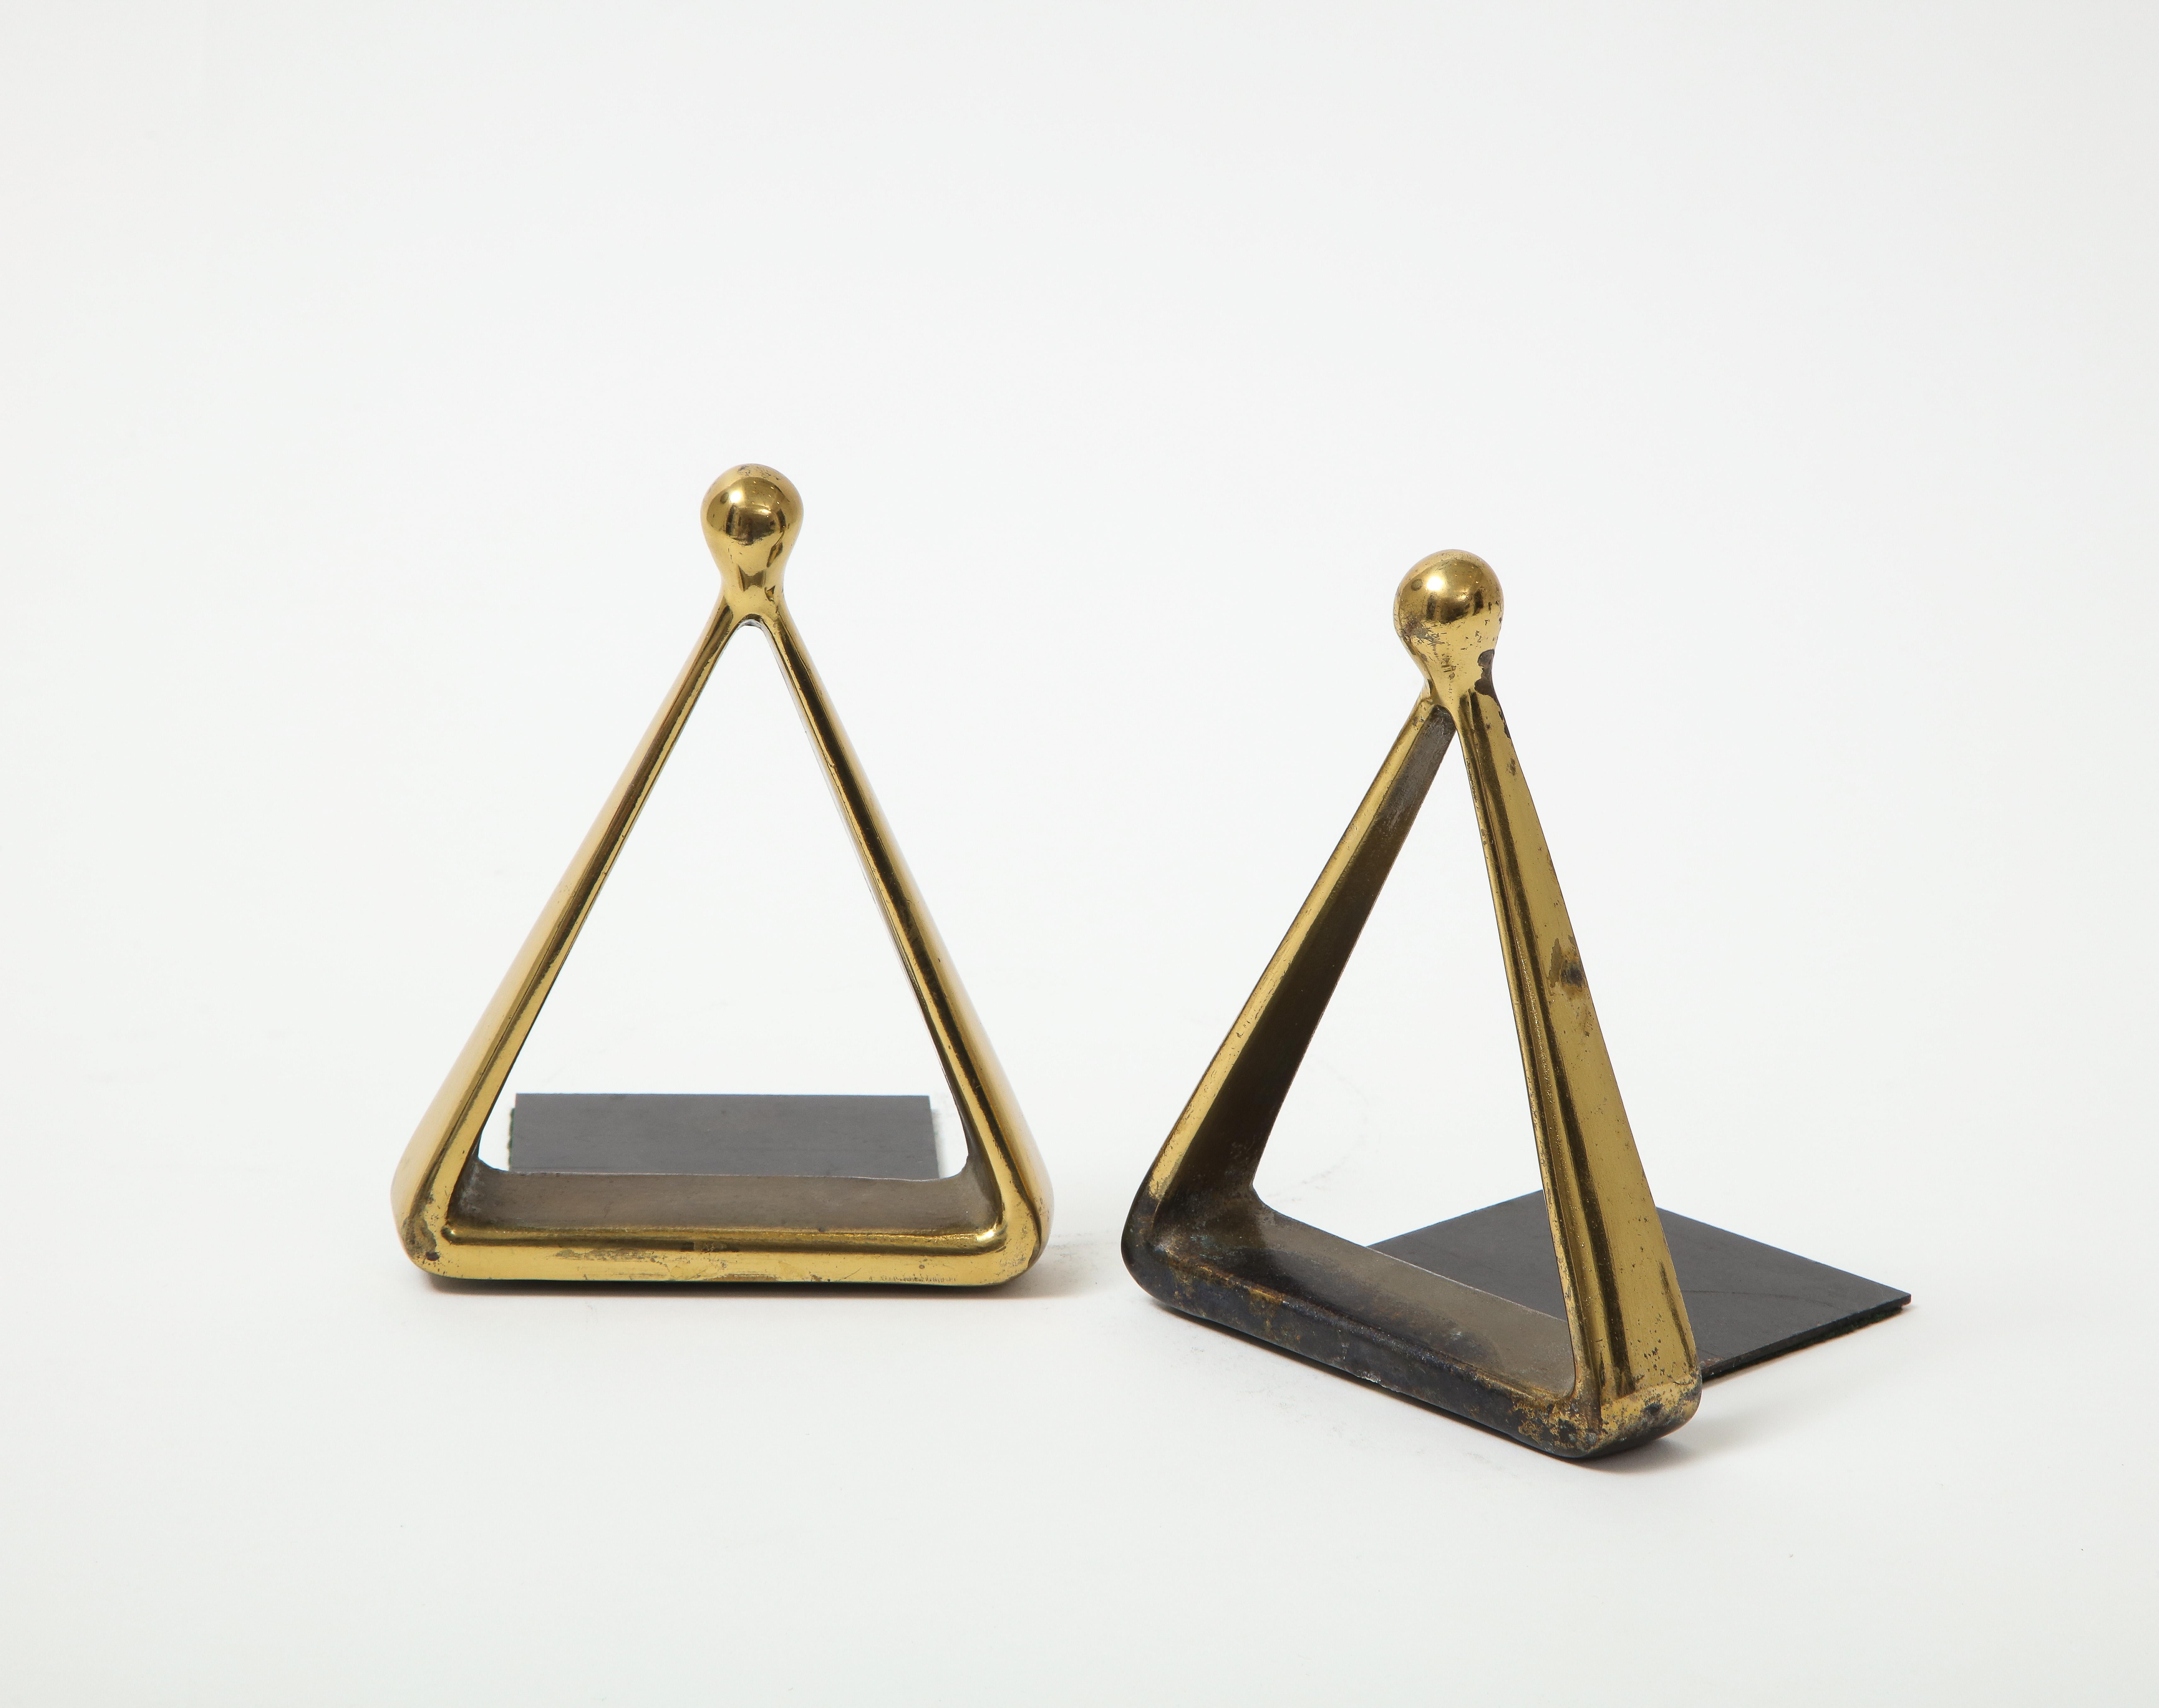 Set of aged brass triangle form bookends designed by Ben Sibel.